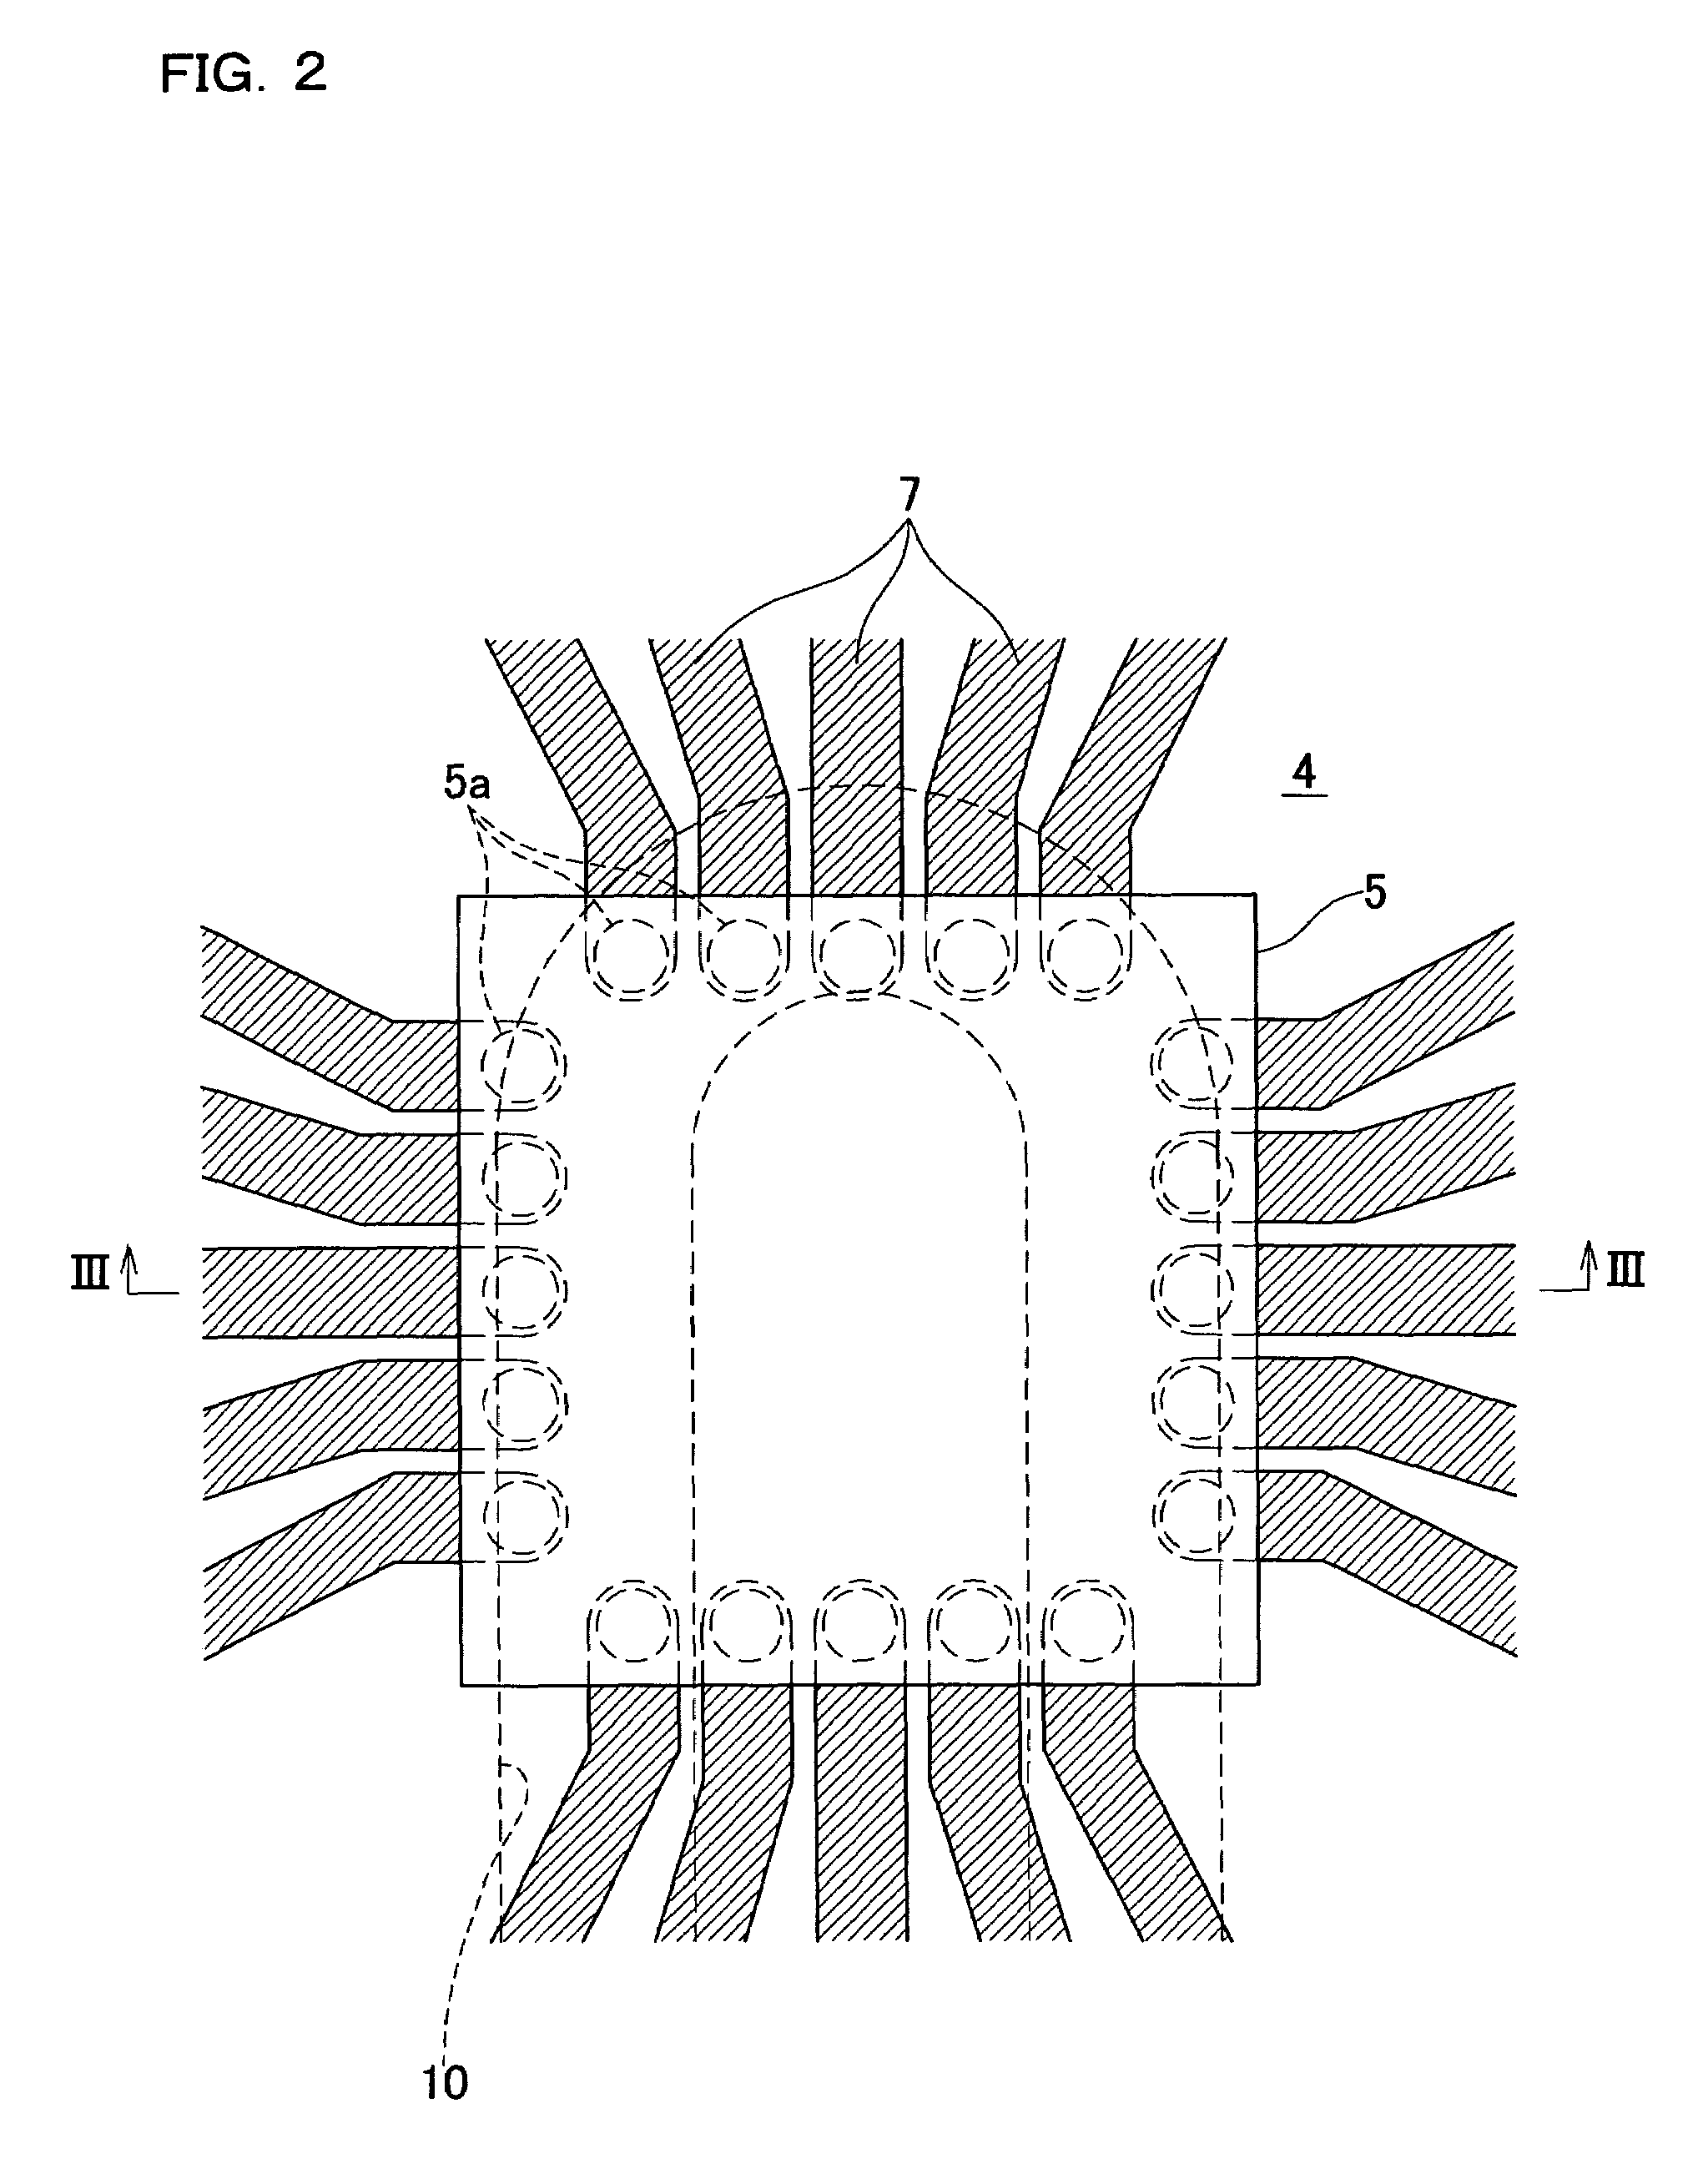 Substrate mounted with electronic element thereon and liquid ejection head including the substrate